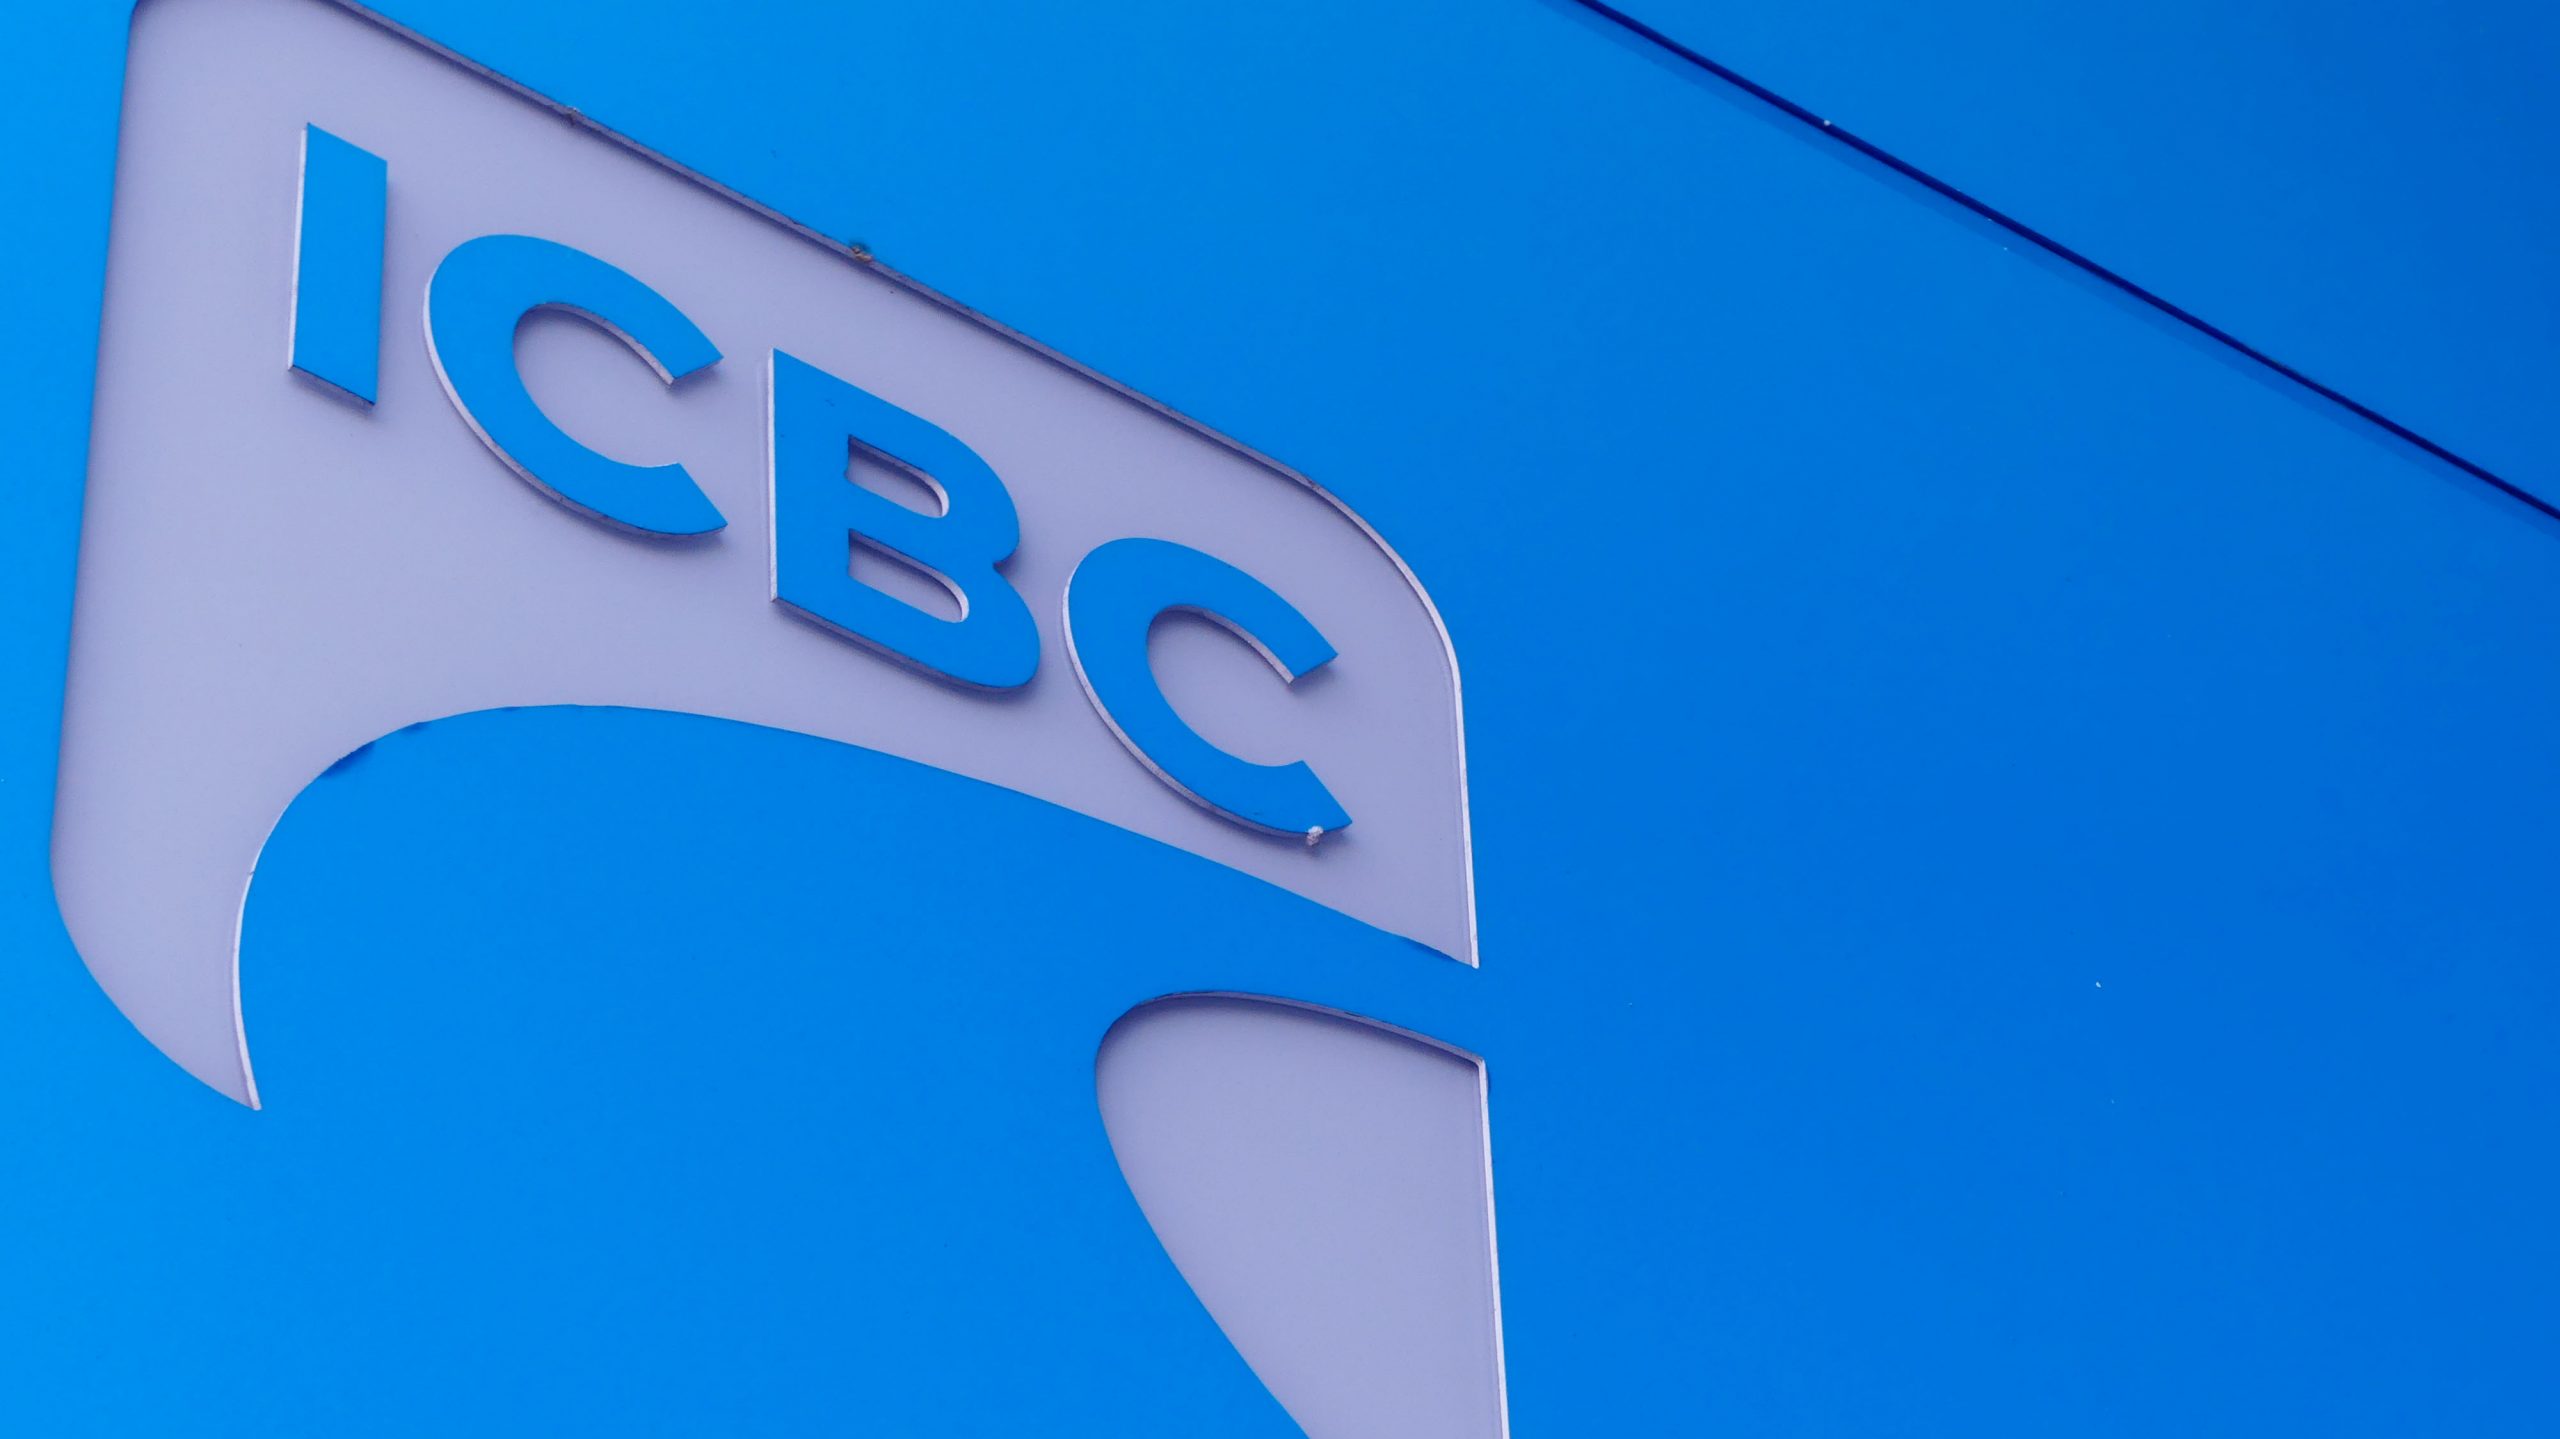 Private Auto Insurers Claim Icbc Is Making It Hard For Them intended for proportions 4000 X 2248